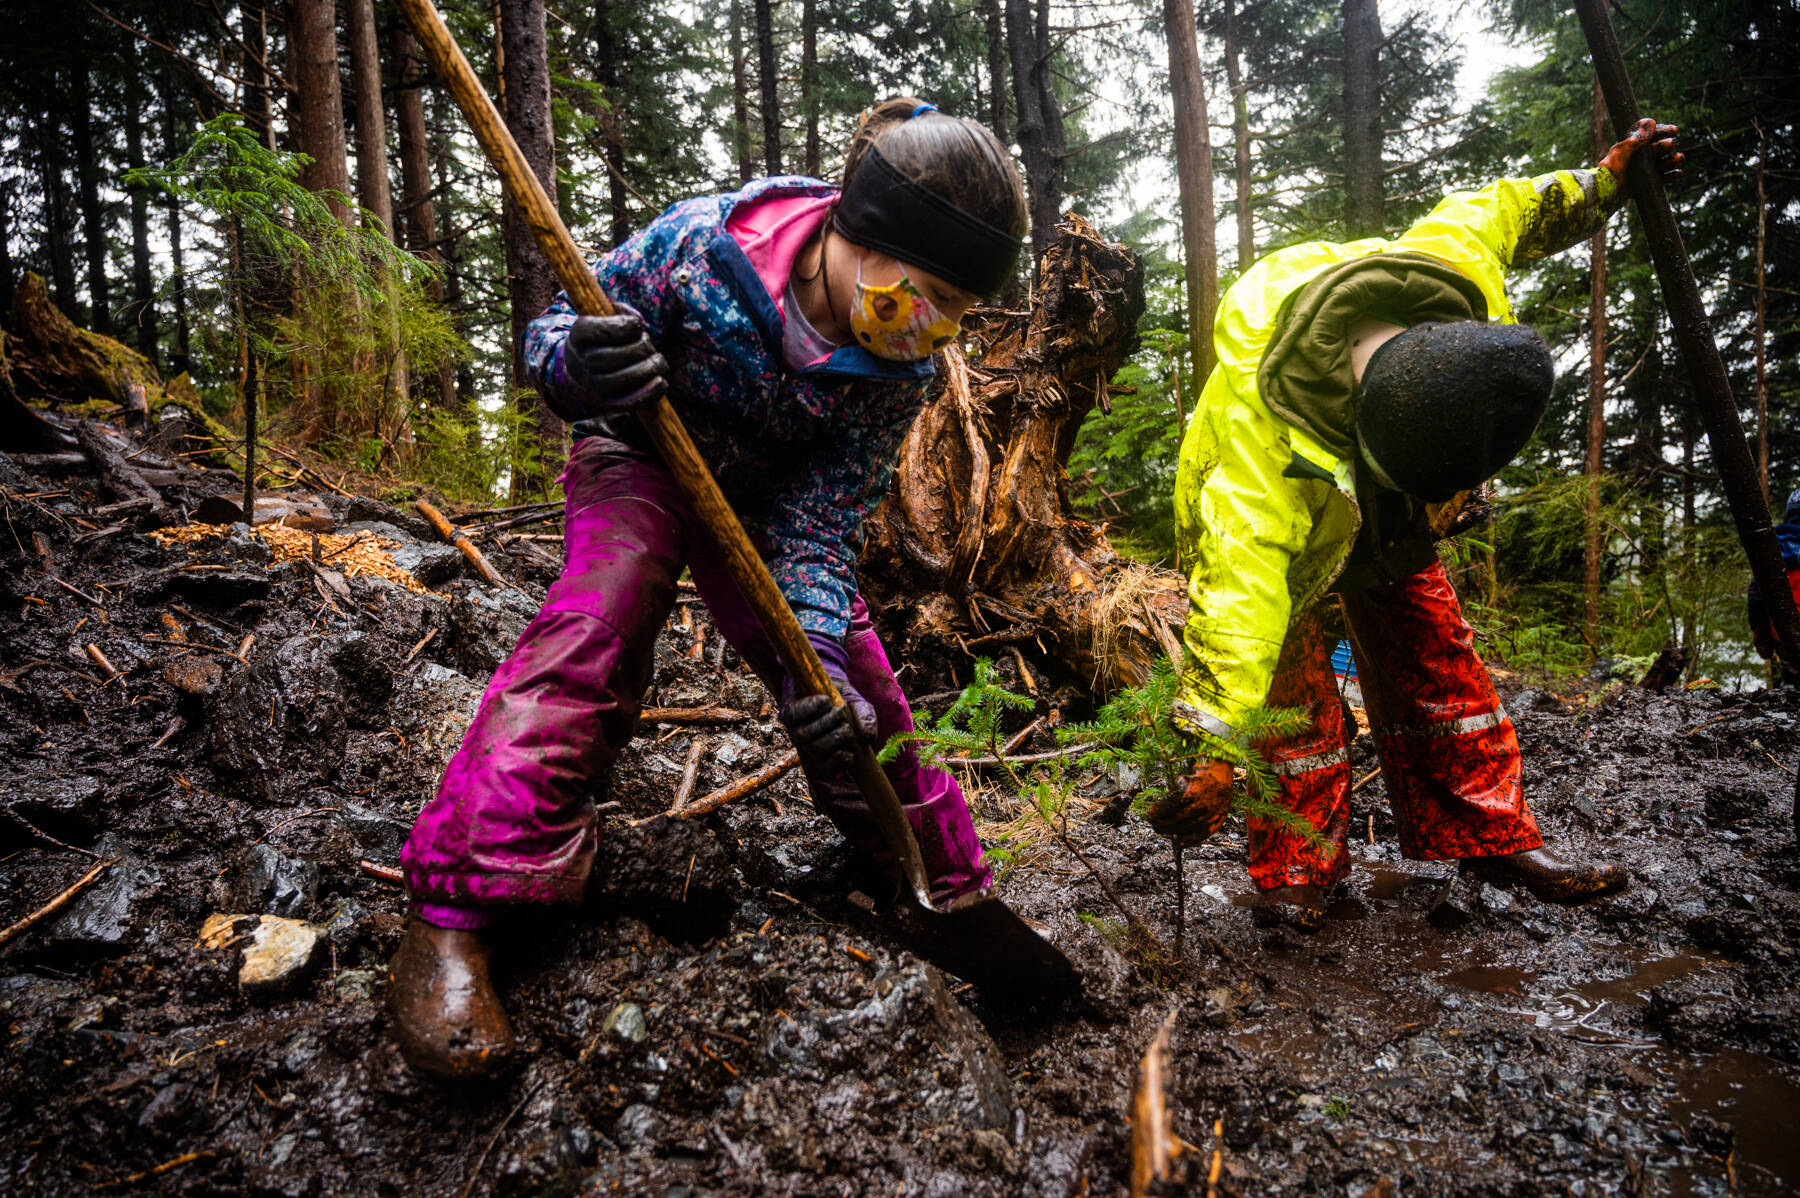 The Sitka Spruce Tips 4-H program plants trees in Sitka during a reforestation project. (Courtesy Photo / Lione Clare)